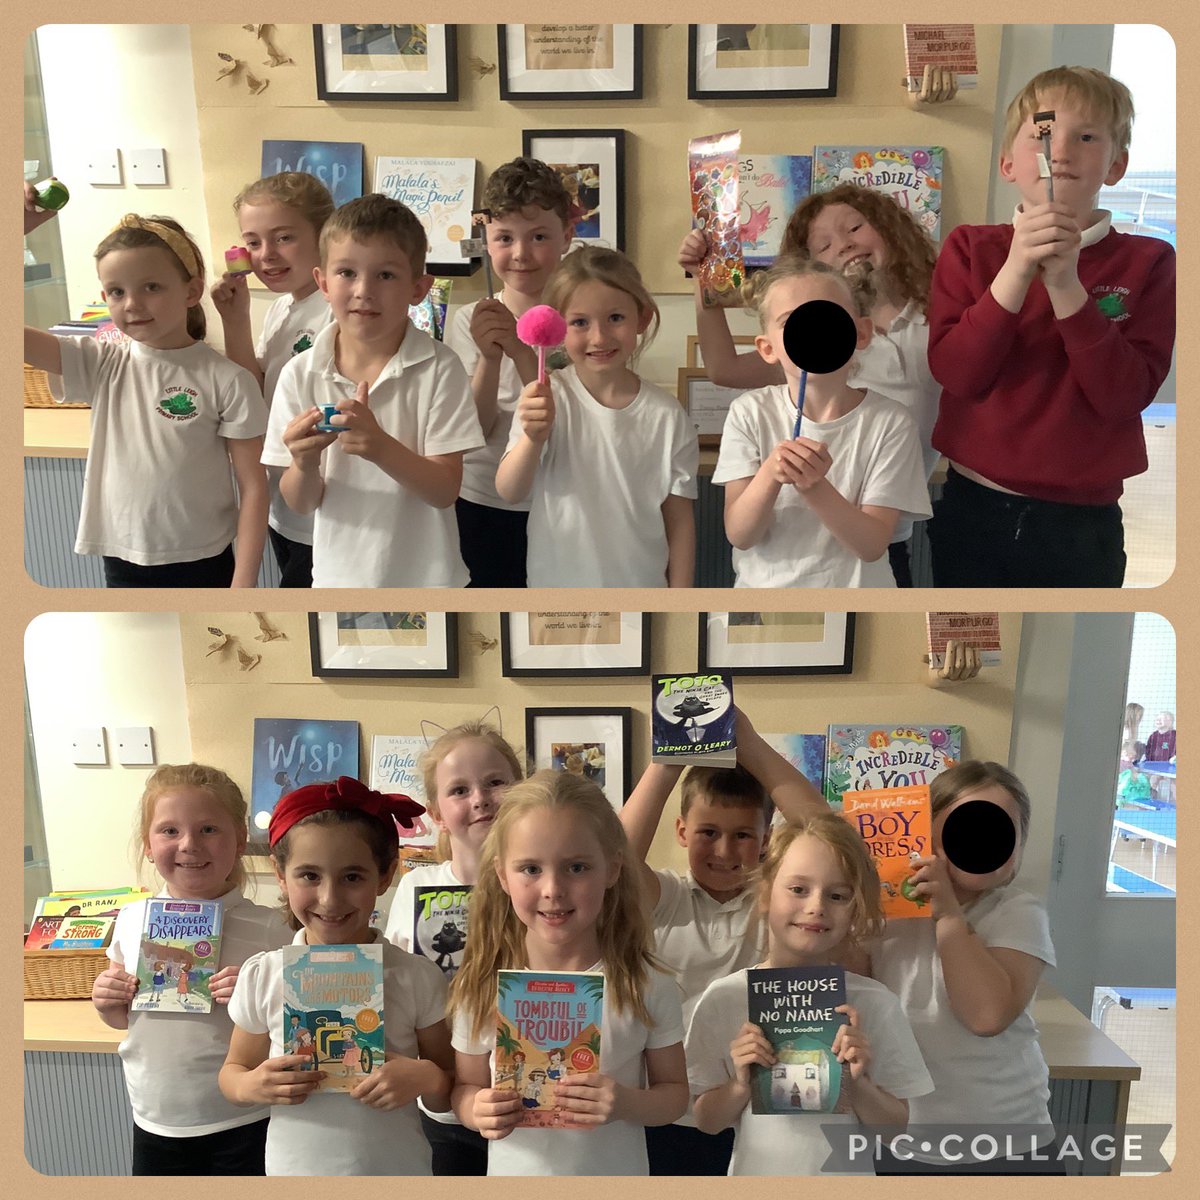 Lots of Year 2 children visited the reading shop on Friday for consistent reading at home. Well done, keep up the good work!